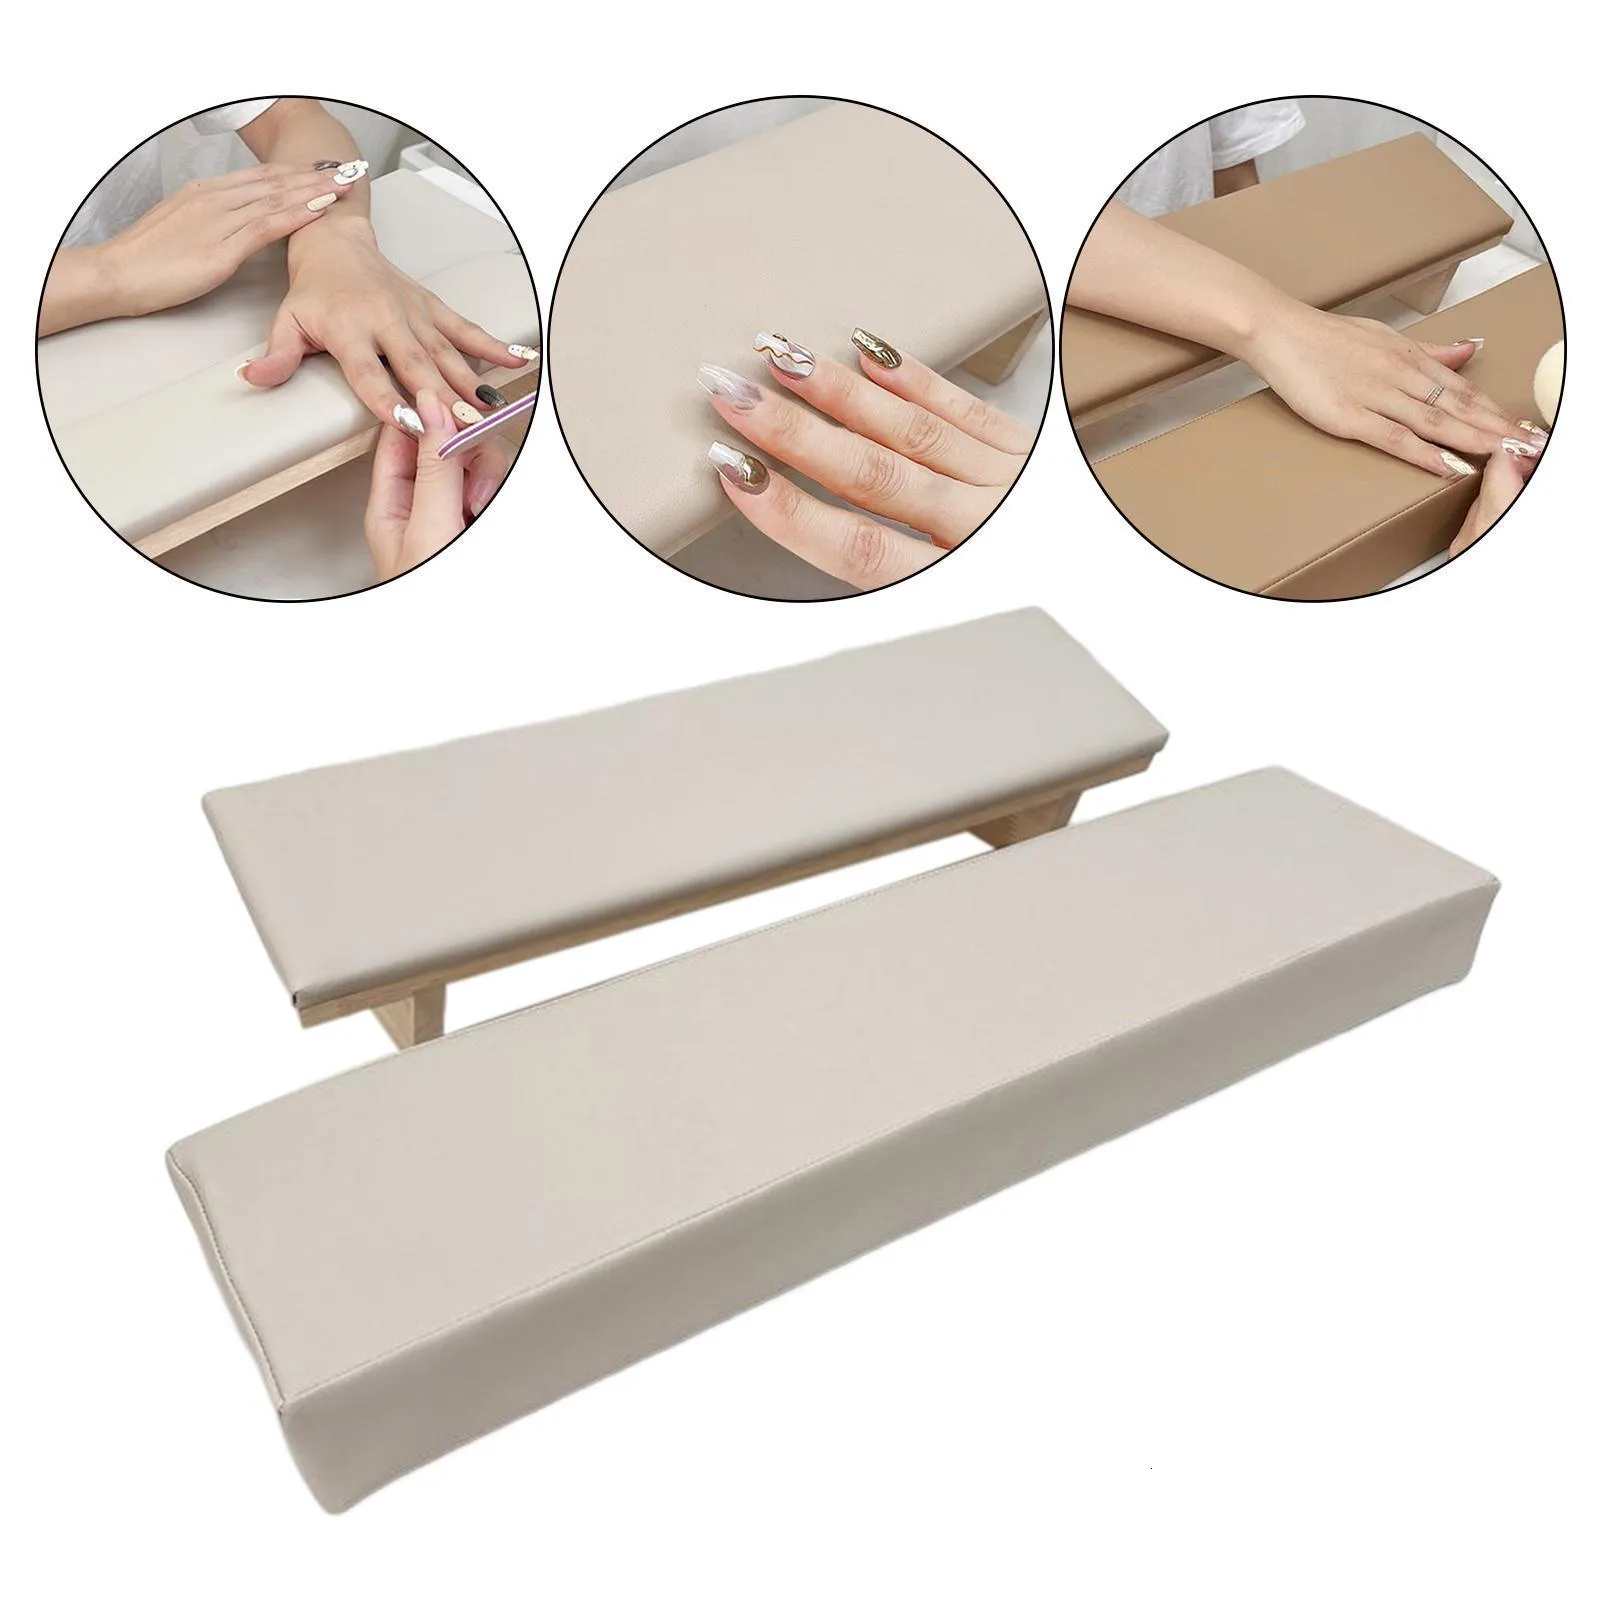 Nail Arm Rest Soft Comfortable Accessories PU Stable Easy to Clean Holder Hand Set for Table Home Manicure Salon